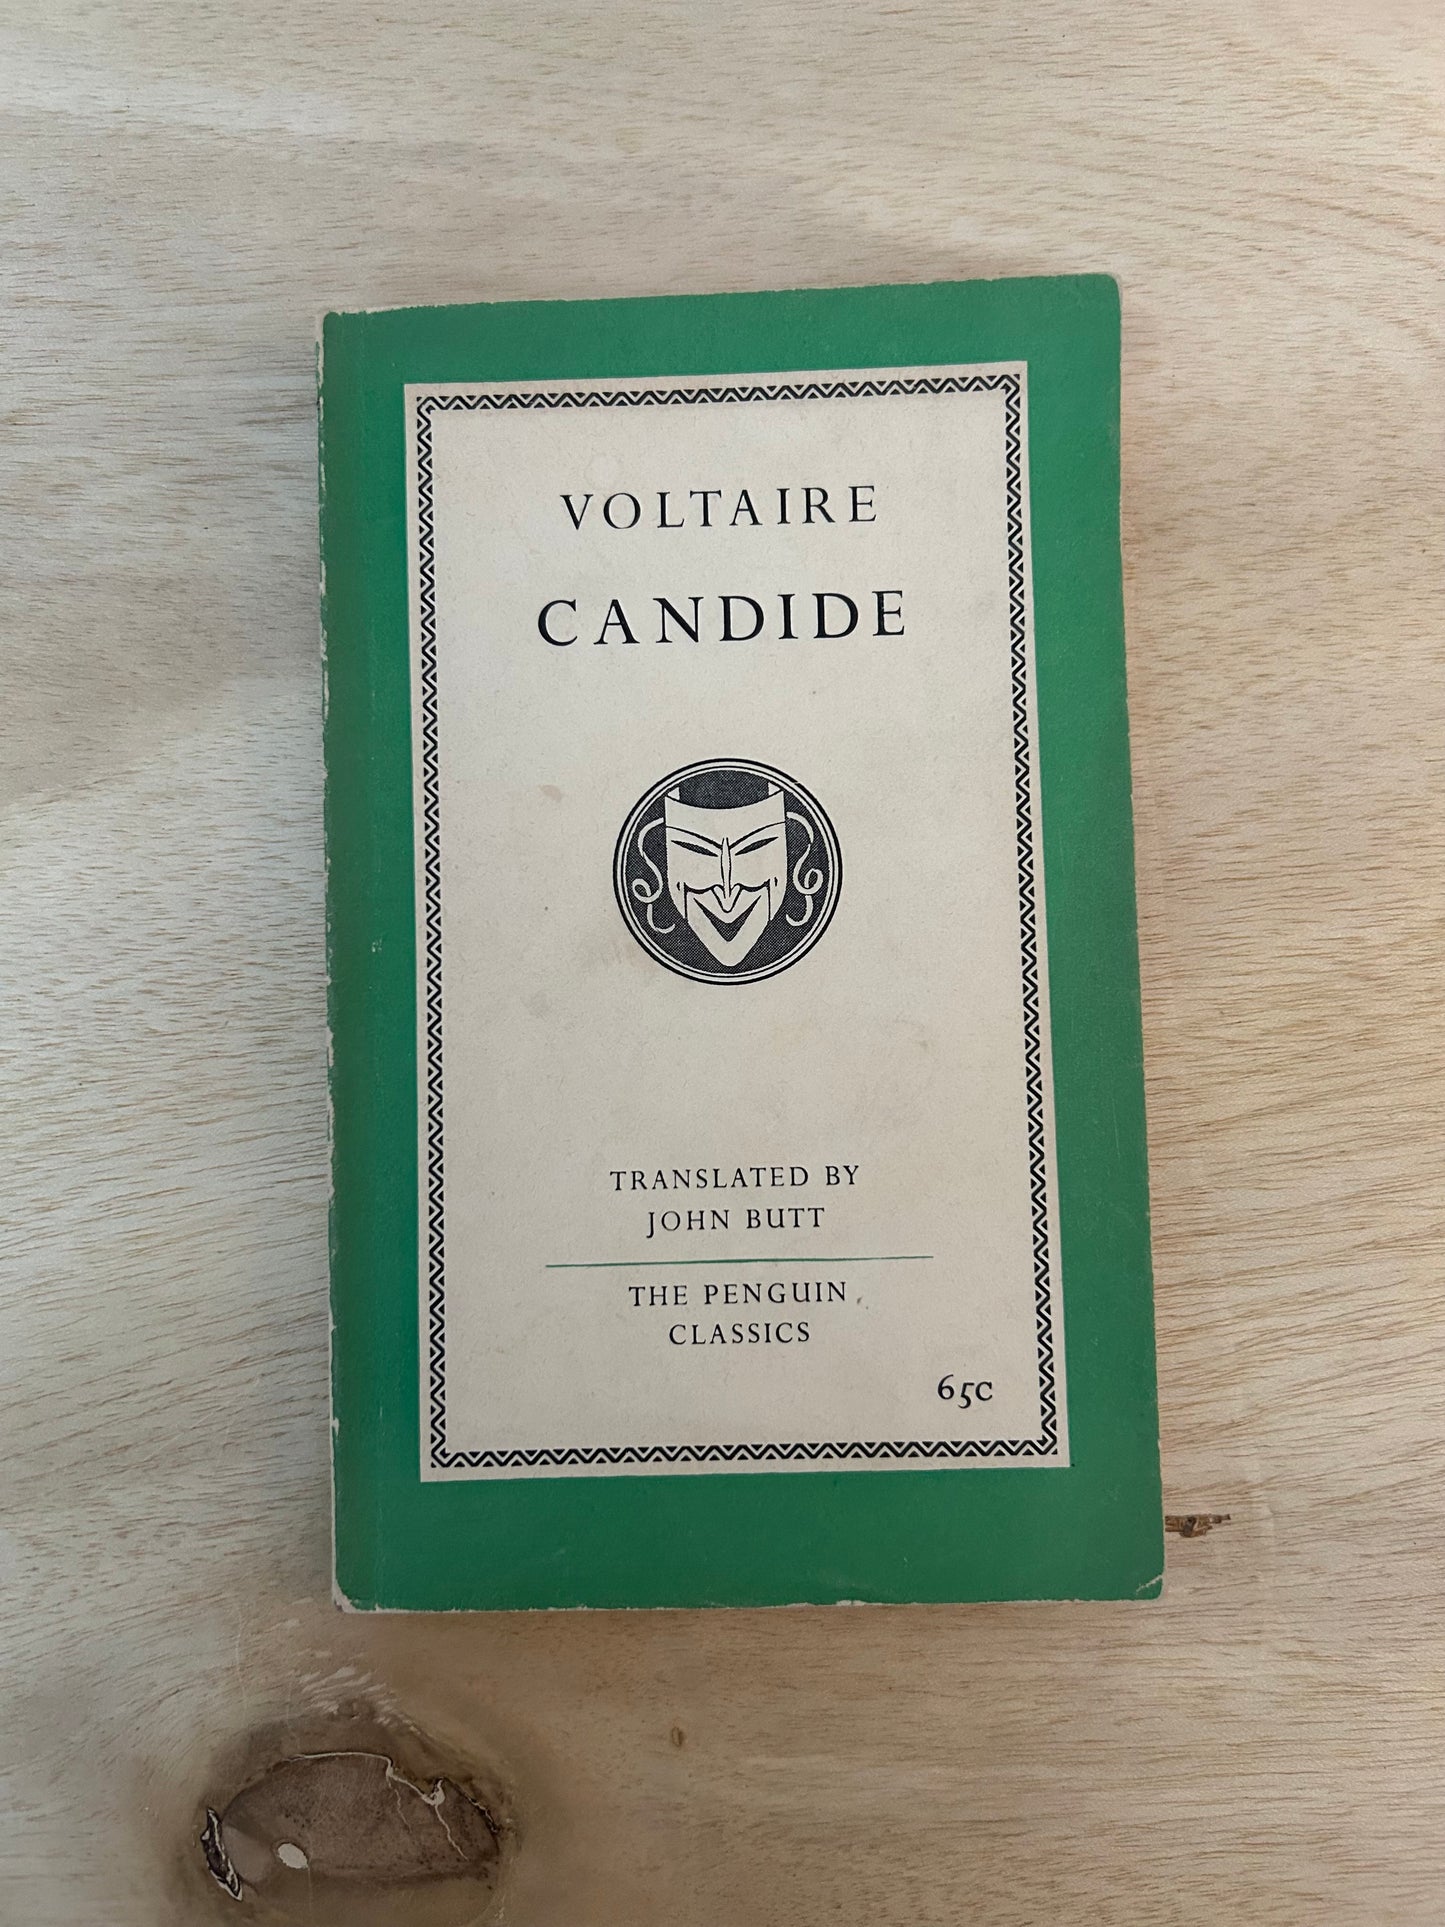 Candide by Voltaire (A Used Penguin Classics Edition)